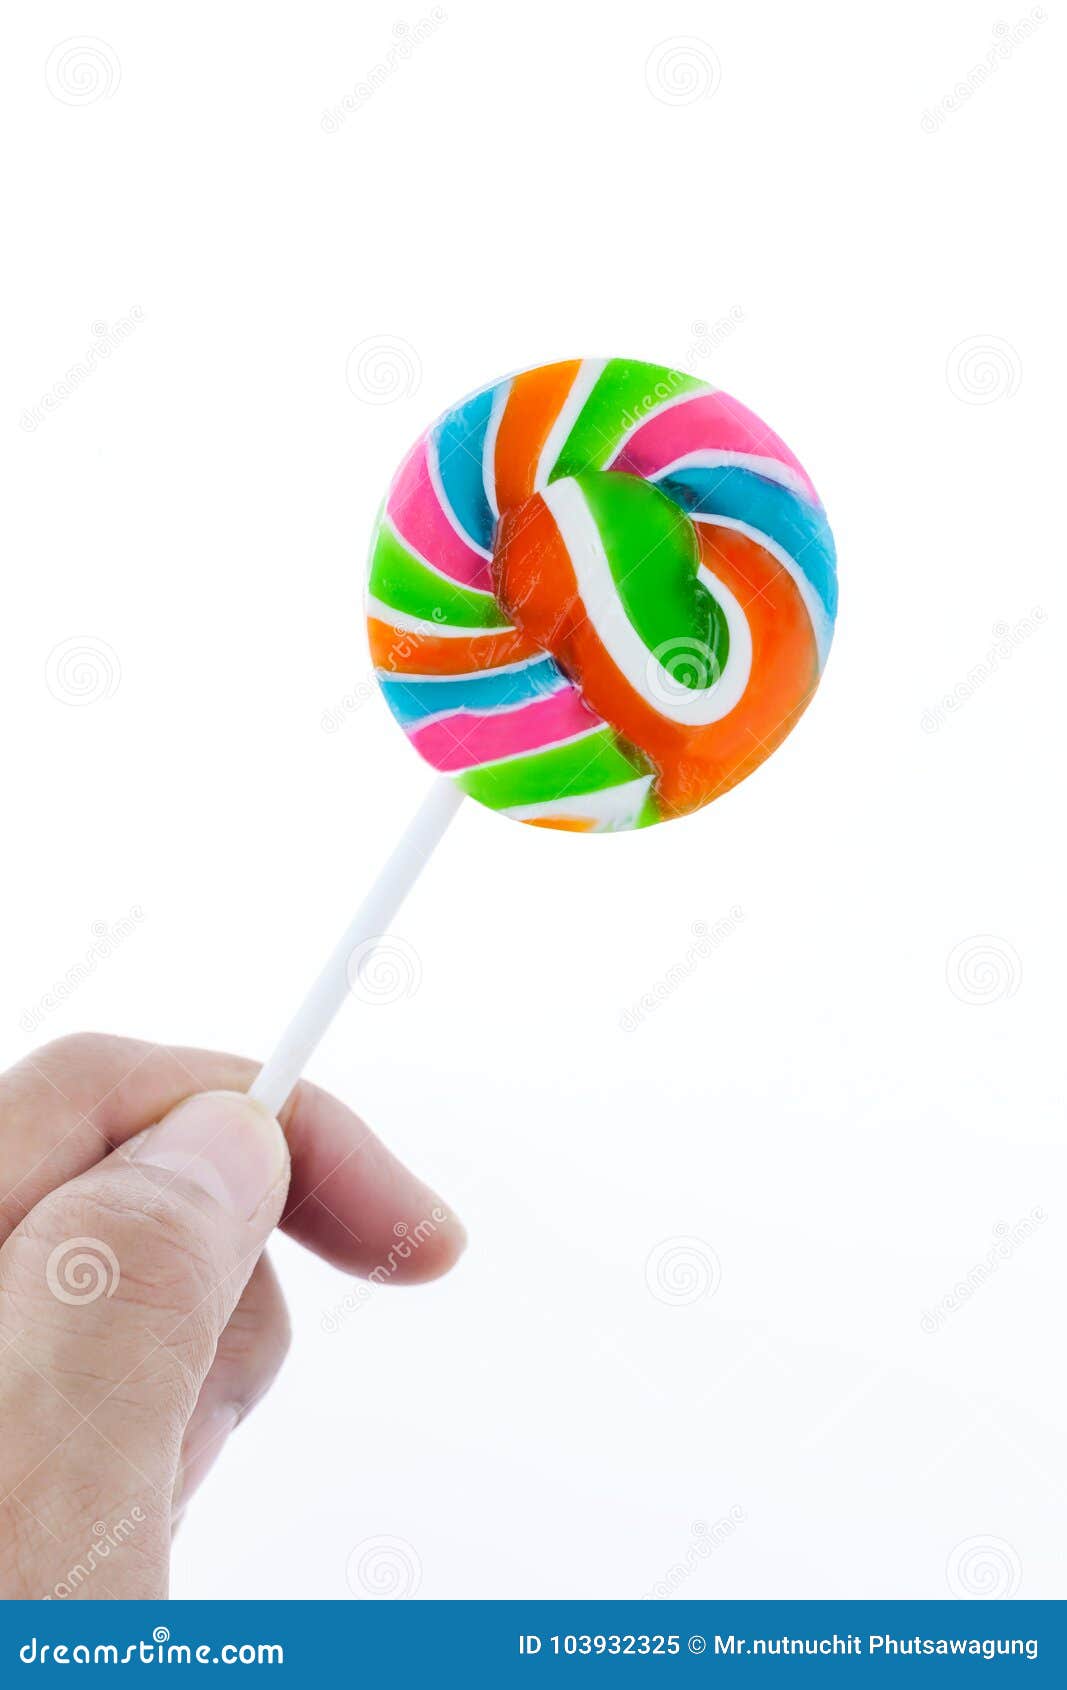 Colorful Lollipops on White Stock Image - Image of hand, dessert: 103932325